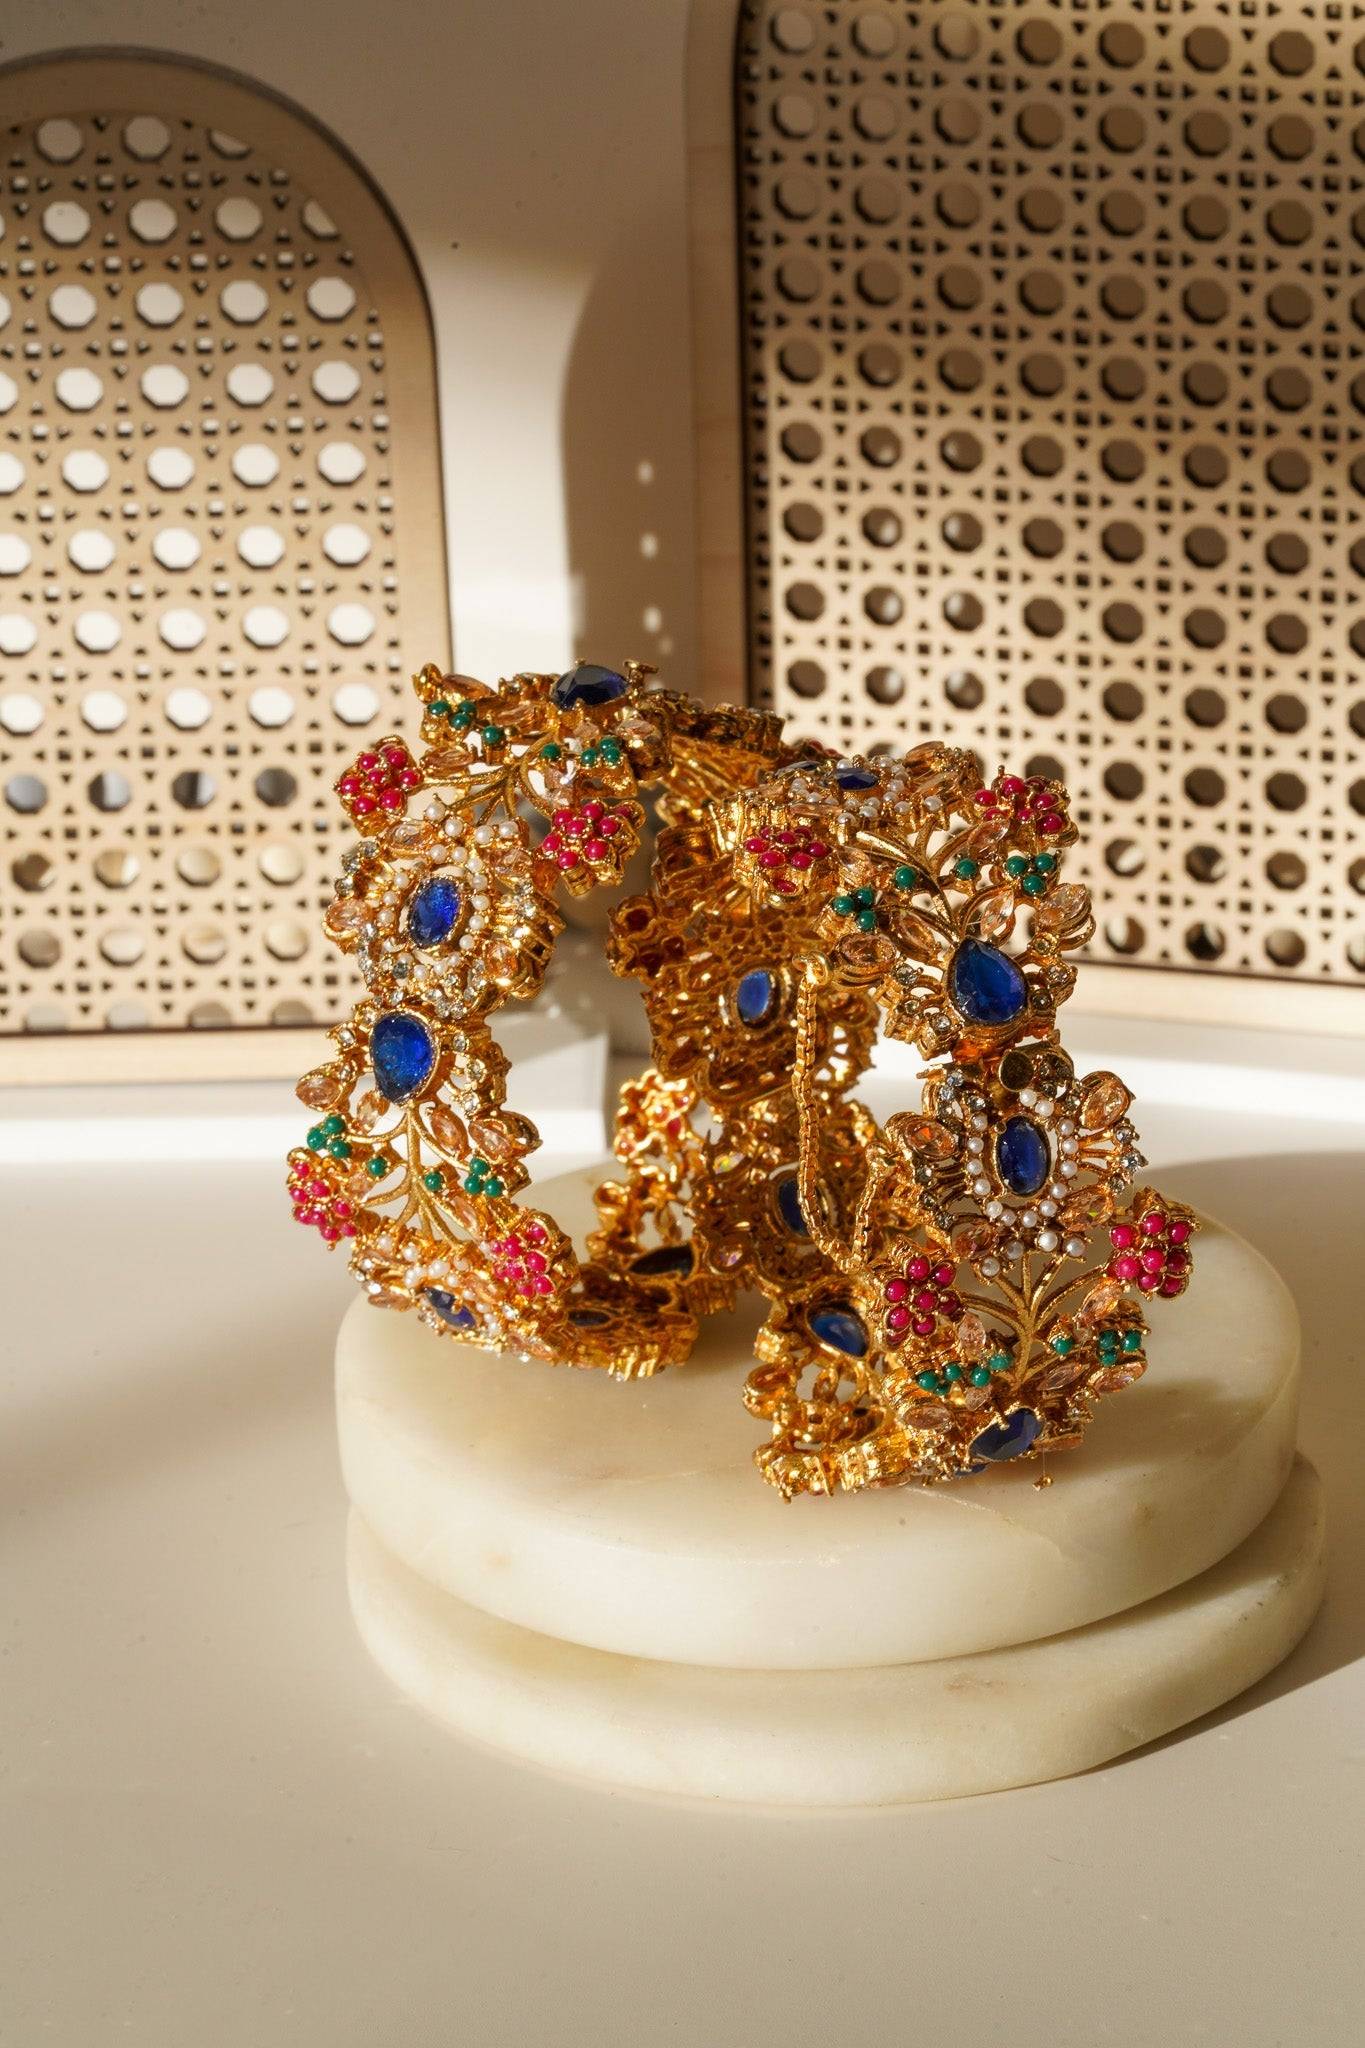 Ziya Intricate Bangles & Bracelets Set of 2 in gold plating with navratan jewelry, featuring multicolor floral and petal patterns, perfect for desi weddings and special occasions.